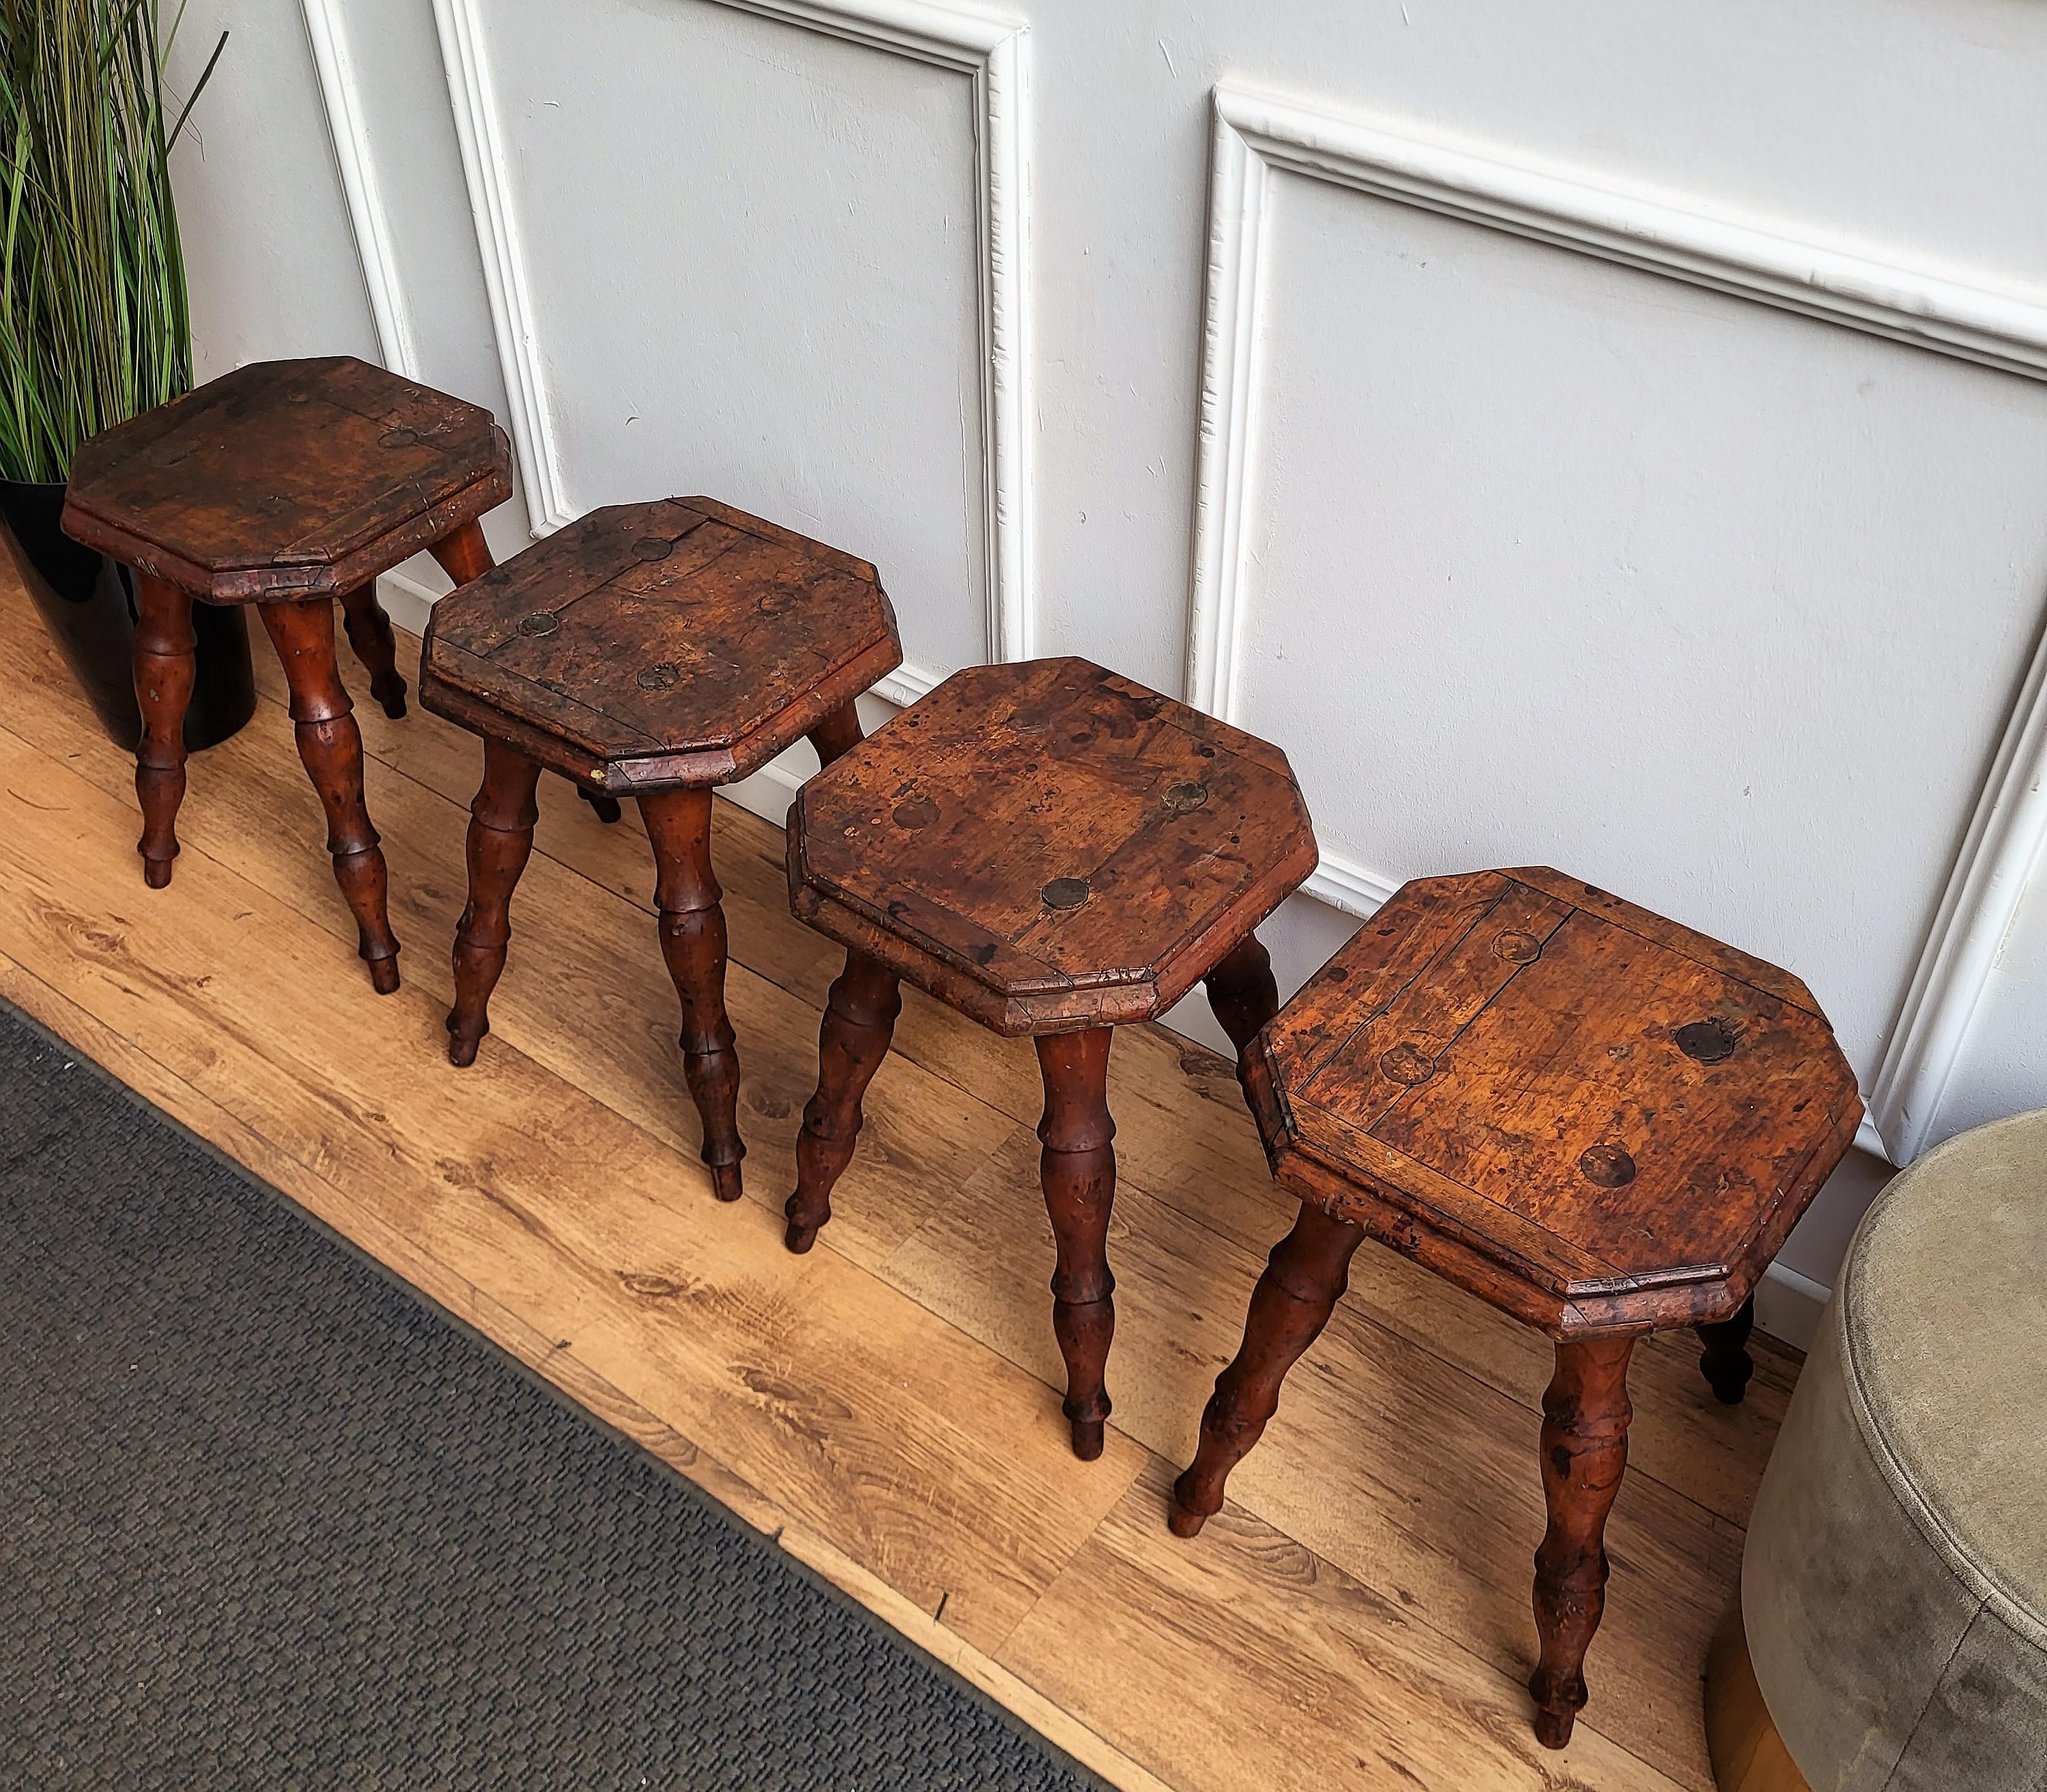 Wood Set of 4 Antique Italian Walnut Side Tables or Stools with Carved Turned Legs For Sale